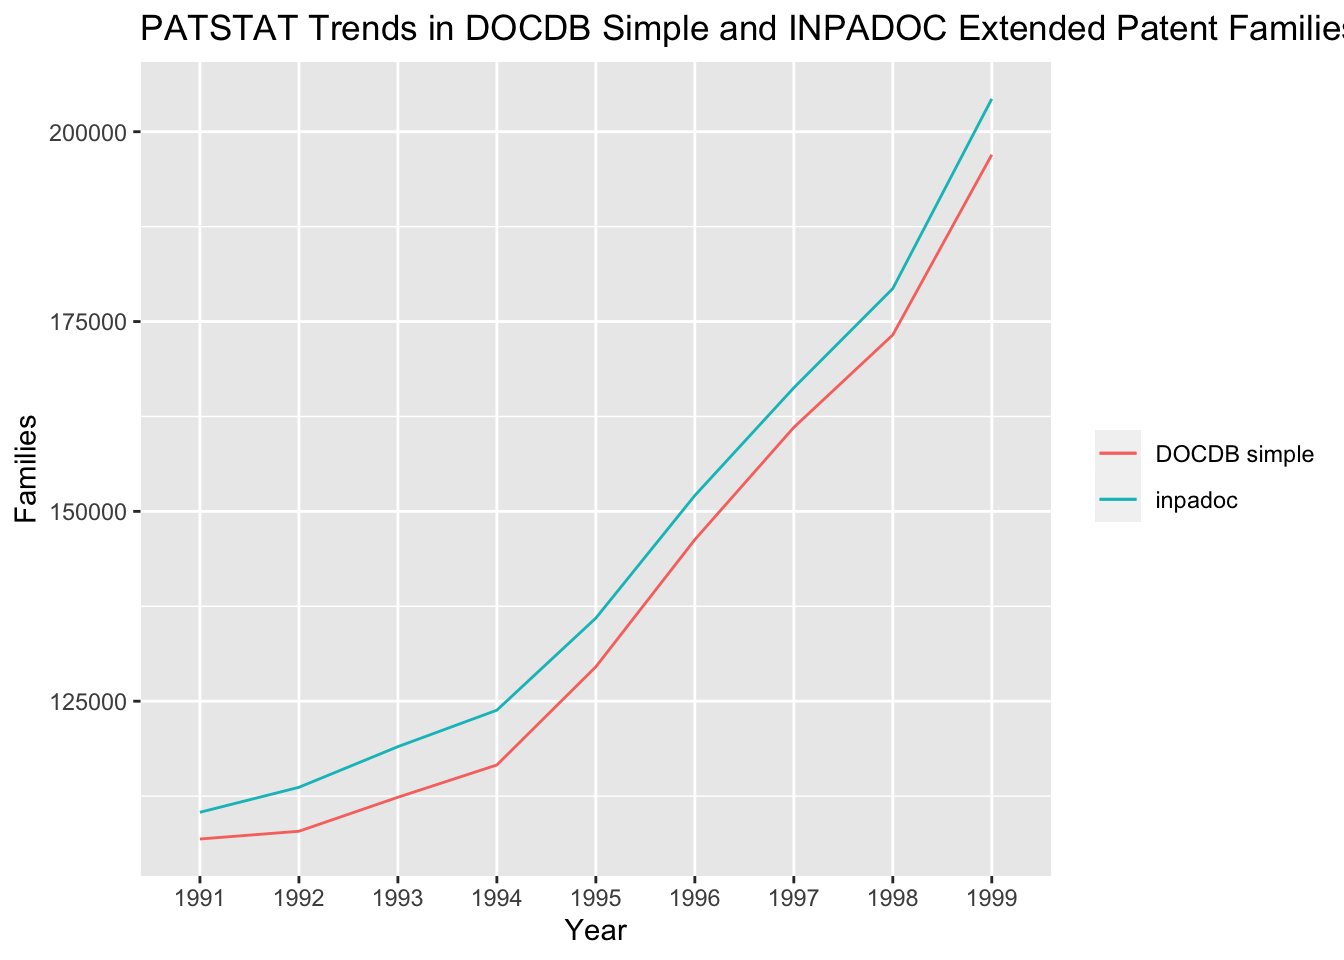 PATSTAT Trends in DOCDB Simple and INPADOC Extended Patent Families 